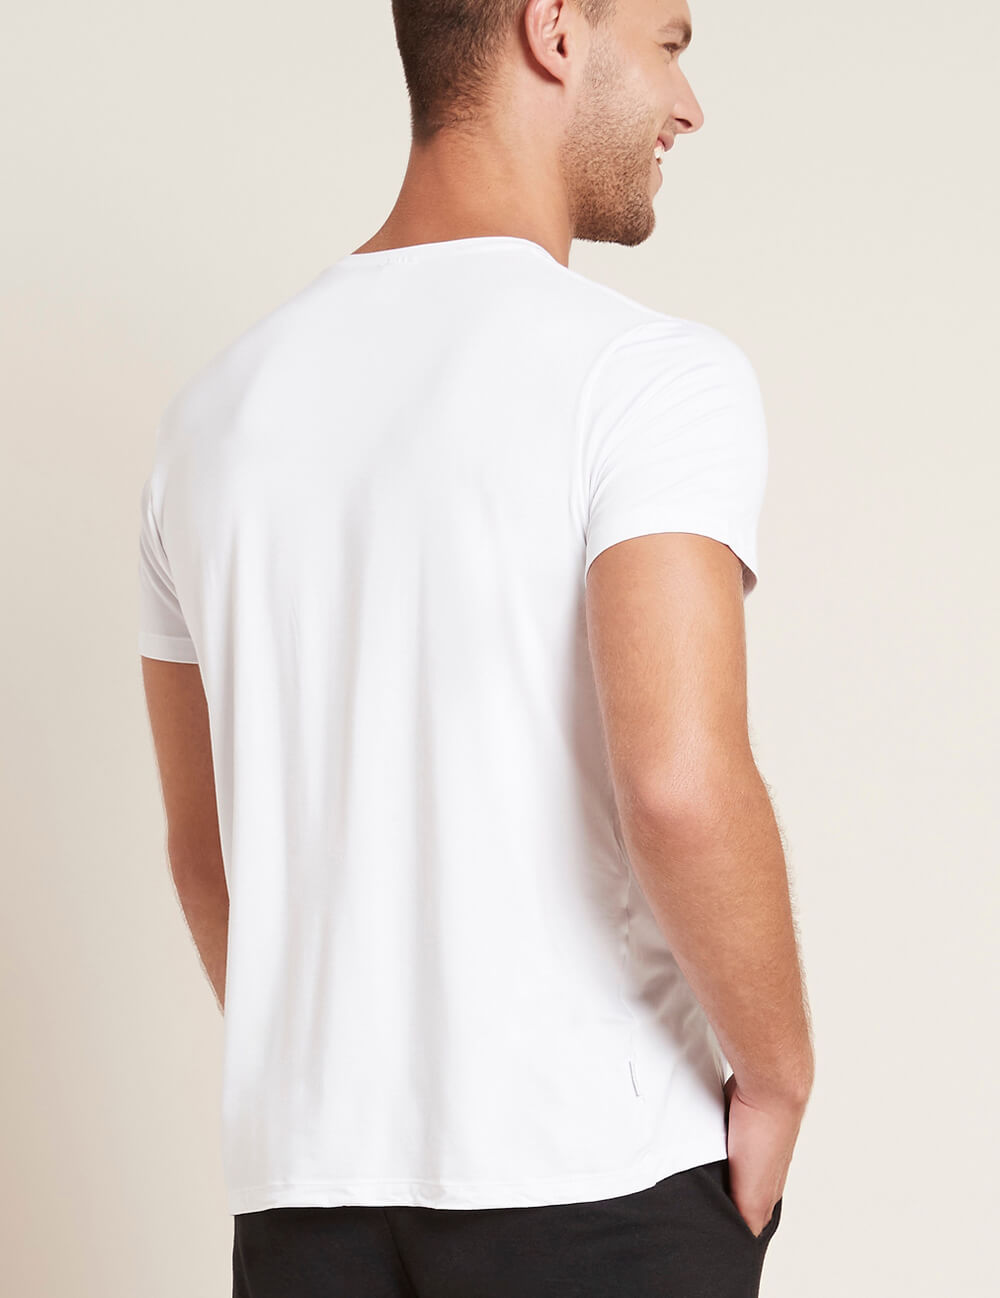 Boody Bamboo Mens Crew Neck Shirt in White Back View